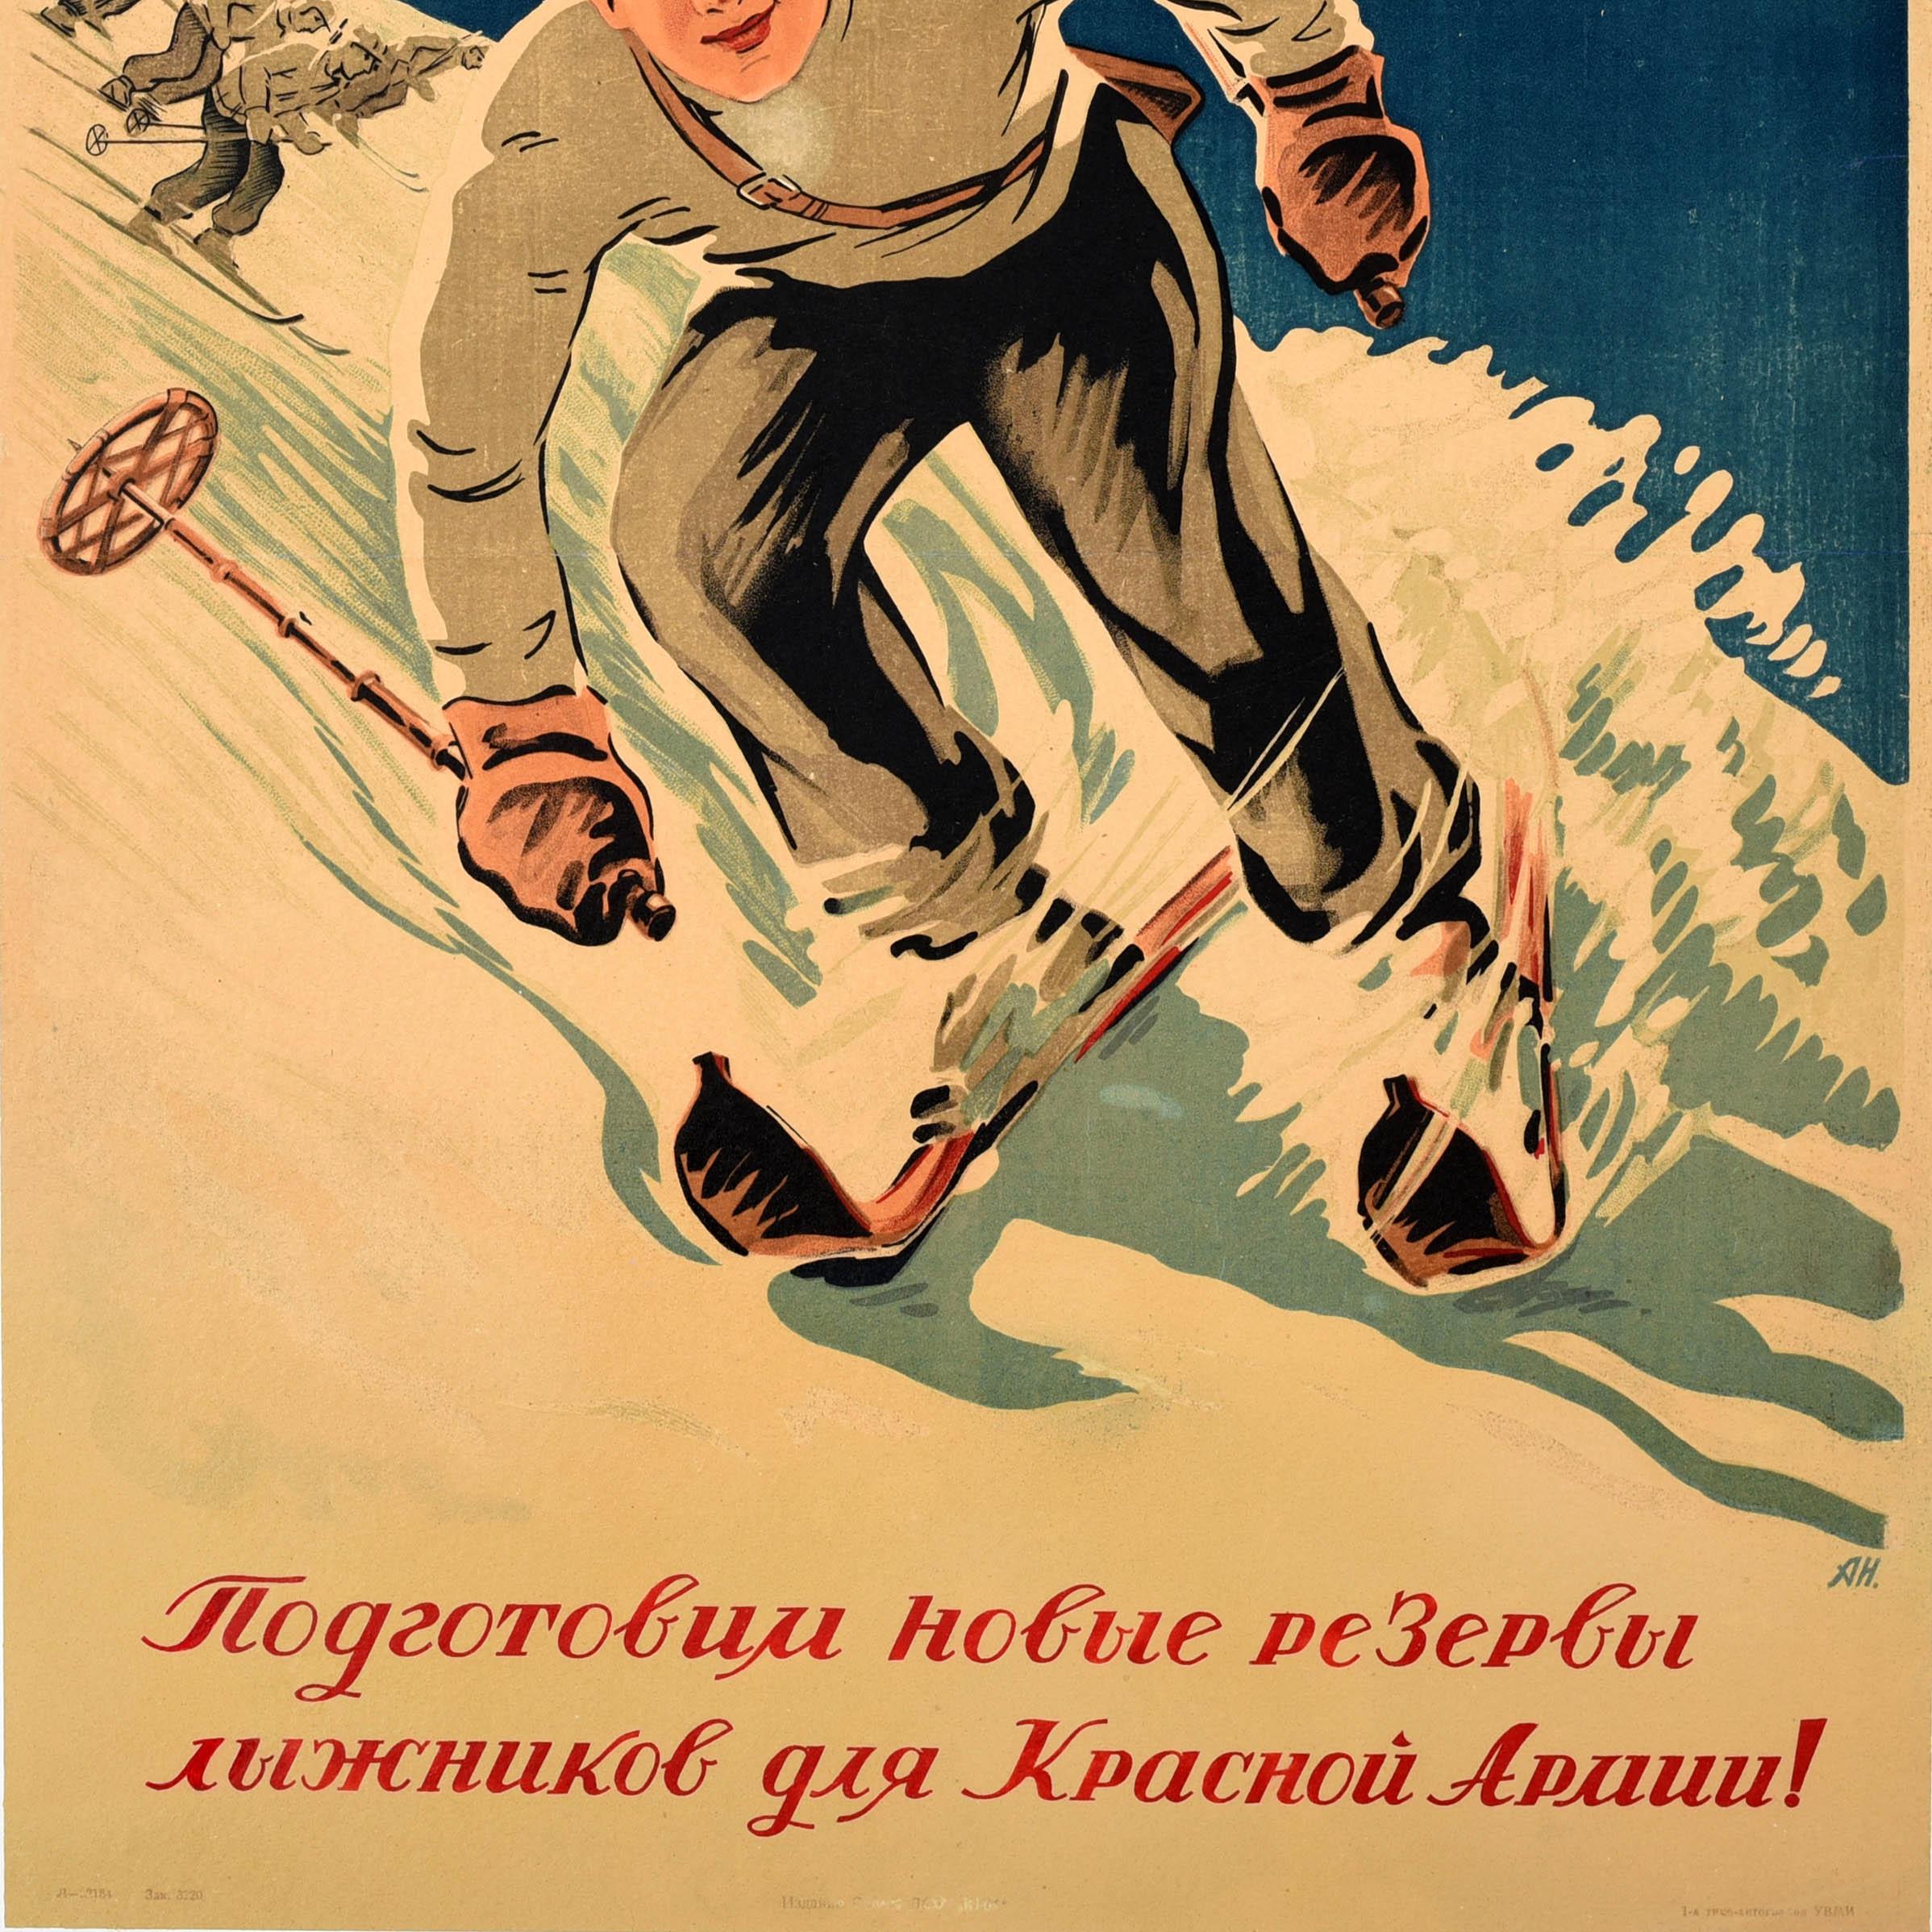 Original vintage Soviet poster for the All Union Voluntary Sports Society - Let's prepare new reserves of skiers for the Red Army! Dynamic artwork featuring a skier skiing towards the viewer at speed with the snow spraying up in front of other